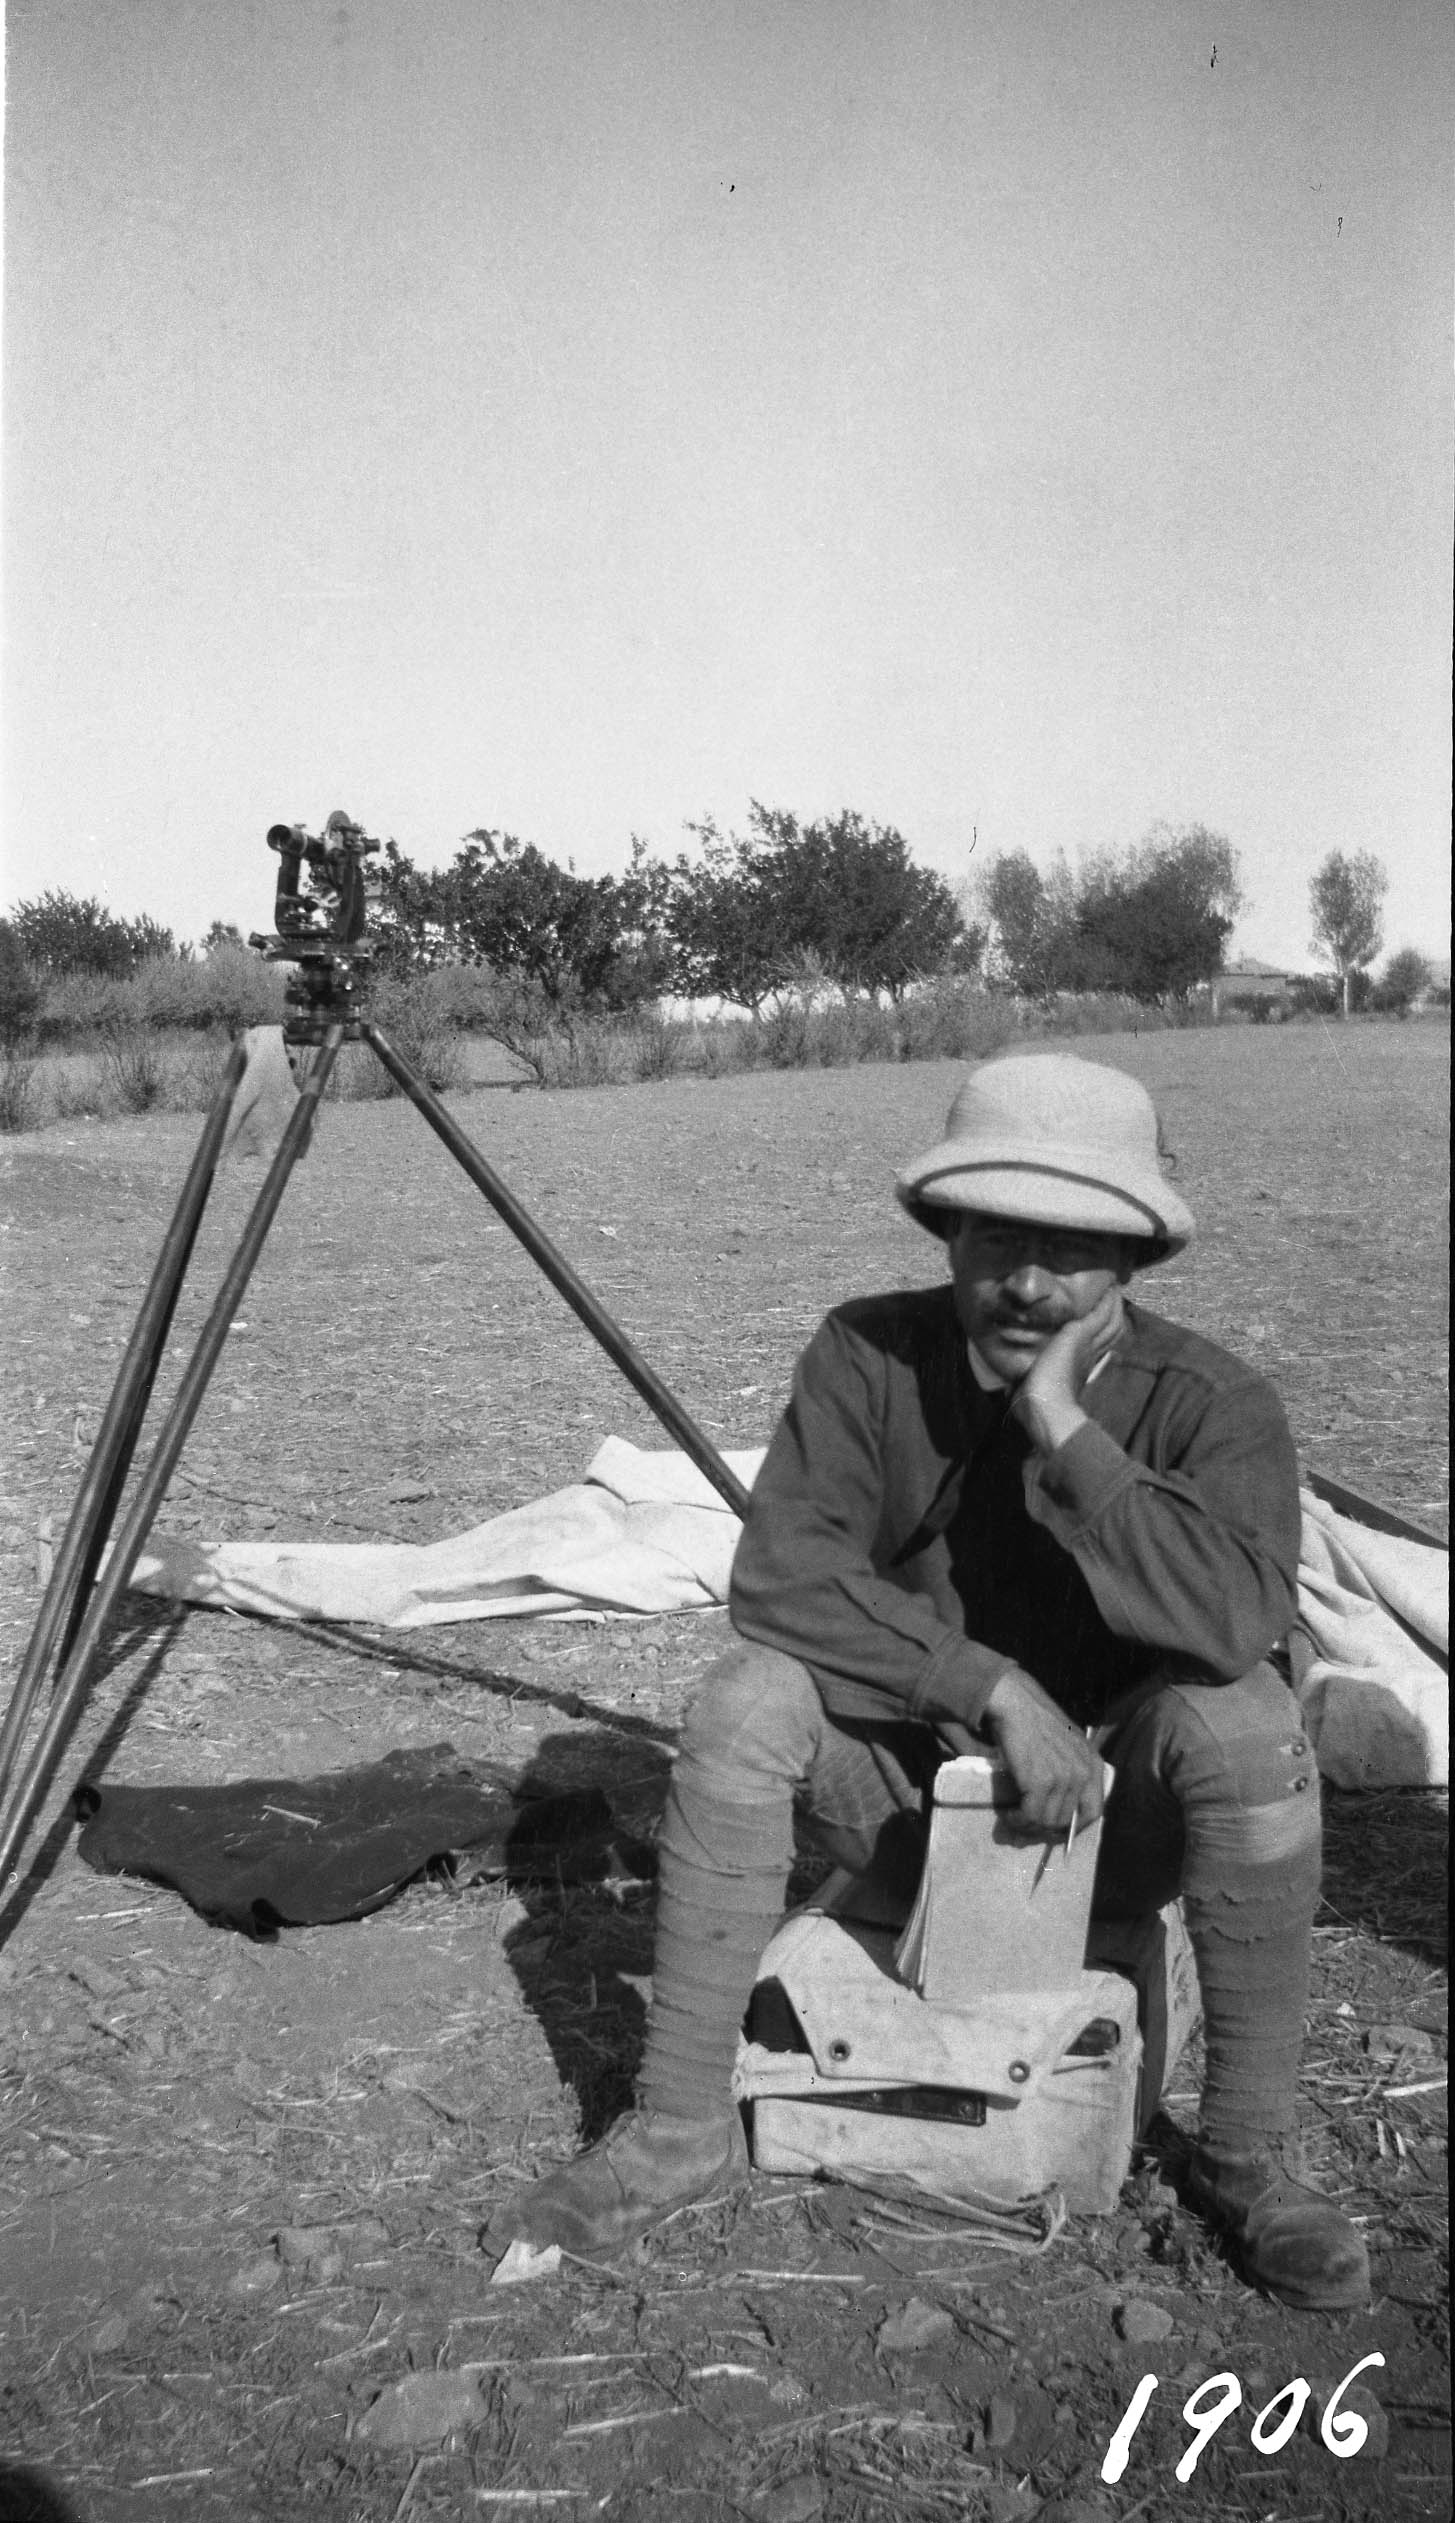 William Sligh at Malatiamagnetic station in Anatolia, August 1910. Image:Carnegie Institution of Washington, Department of Terrestrial Magnetism